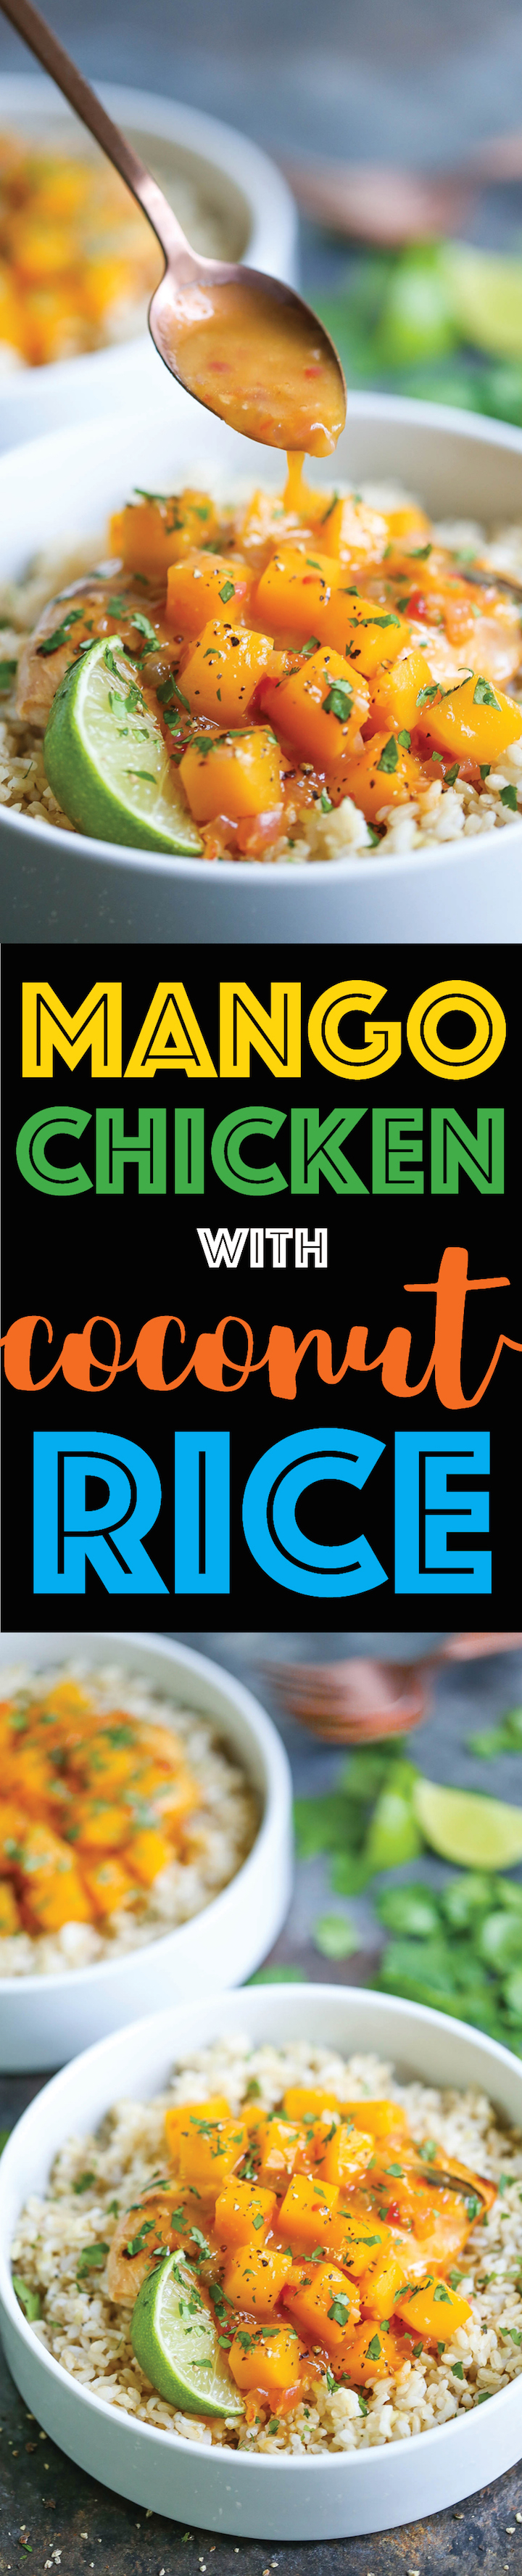 Mango Chicken with Coconut Rice - With a mango sauce that is perfectly sweet and tangy on a bed of homemade coconut rice. SO EASY and made in less than 30!